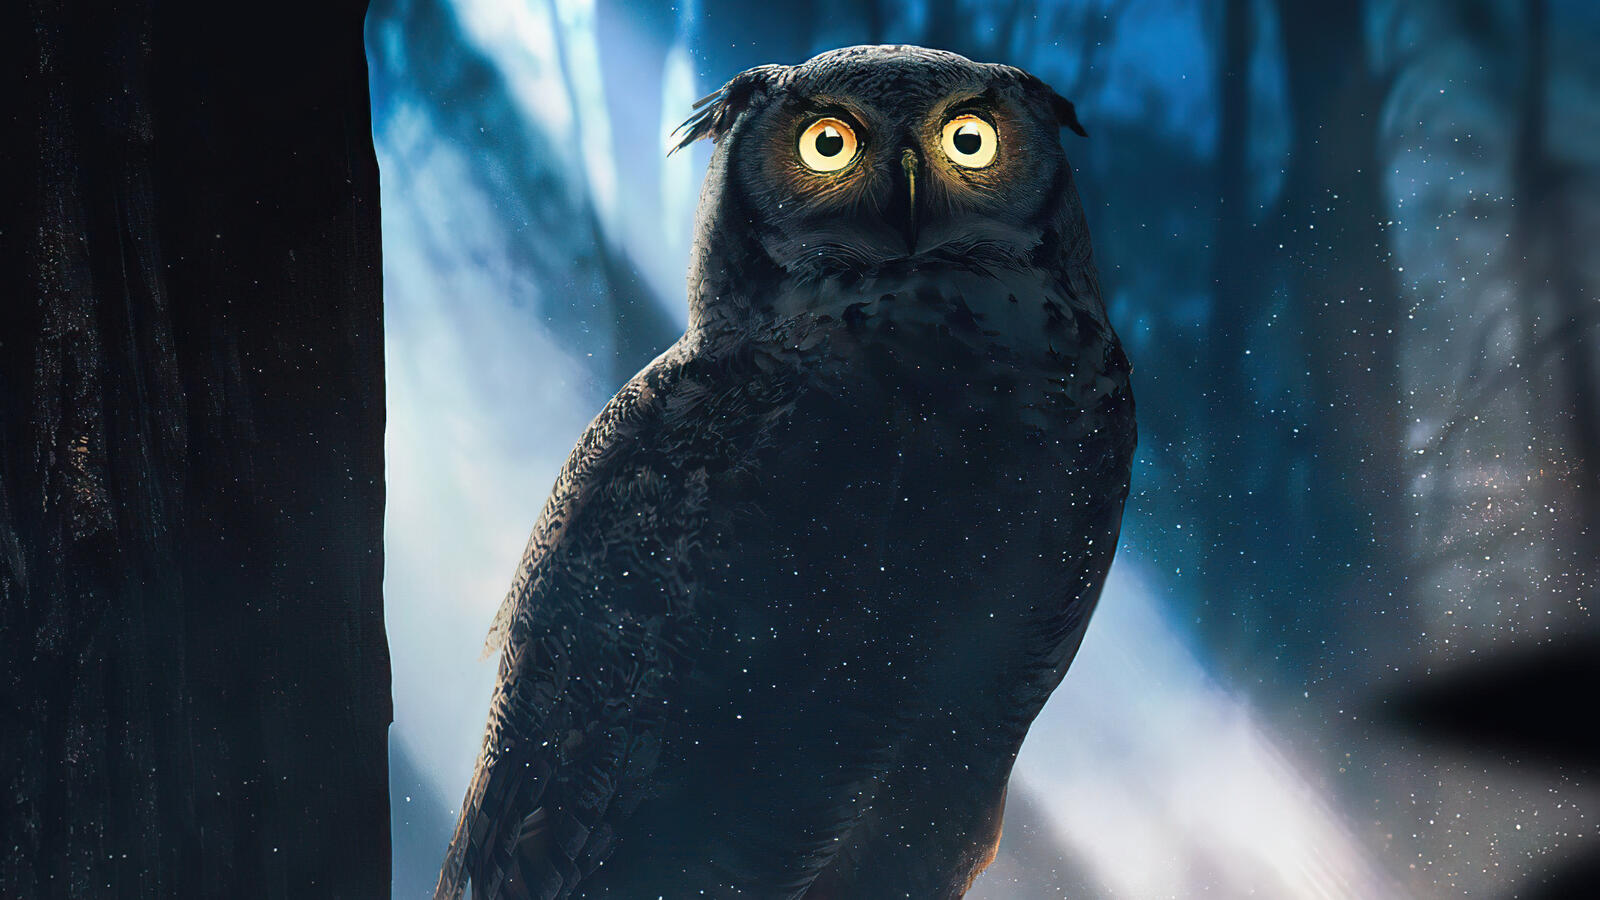 Free photo Rendering of an owl with glowing eyes in a night forest